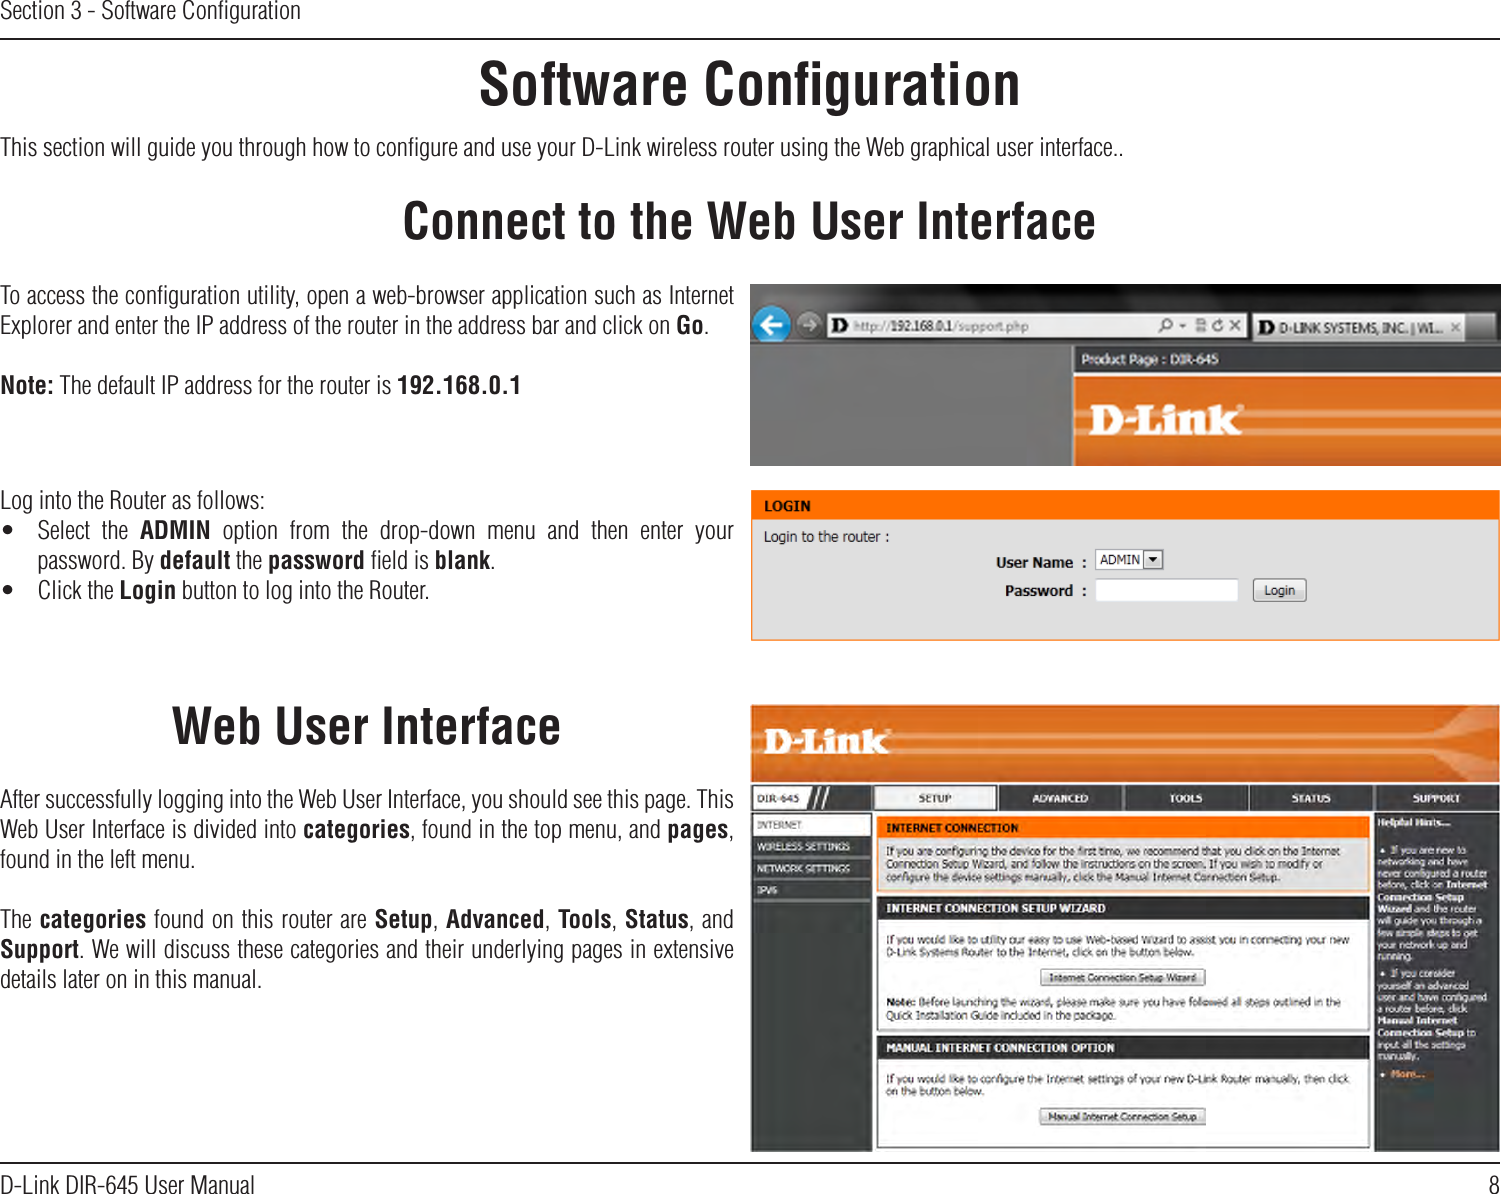 8D-Link DIR-645 User ManualSection 3 - Software ConﬁgurationSoftware ConﬁgurationConnect to the Web User InterfaceThis section will guide you through how to conﬁgure and use your D-Link wireless router using the Web graphical user interface..To access the conﬁguration utility, open a web-browser application such as Internet Explorer and enter the IP address of the router in the address bar and click on Go.Note: The default IP address for the router is 192.168.0.1Log into the Router as follows:•  Select  the  ADMIN  option  from  the  drop-down  menu  and  then  enter  your password. By default the password ﬁeld is blank.•  Click the Login button to log into the Router.After successfully logging into the Web User Interface, you should see this page. This Web User Interface is divided into categories, found in the top menu, and pages, found in the left menu. The categories found on this router are Setup, Advanced, Tools, Status, and Support. We will discuss these categories and their underlying pages in extensive details later on in this manual.Web User Interface